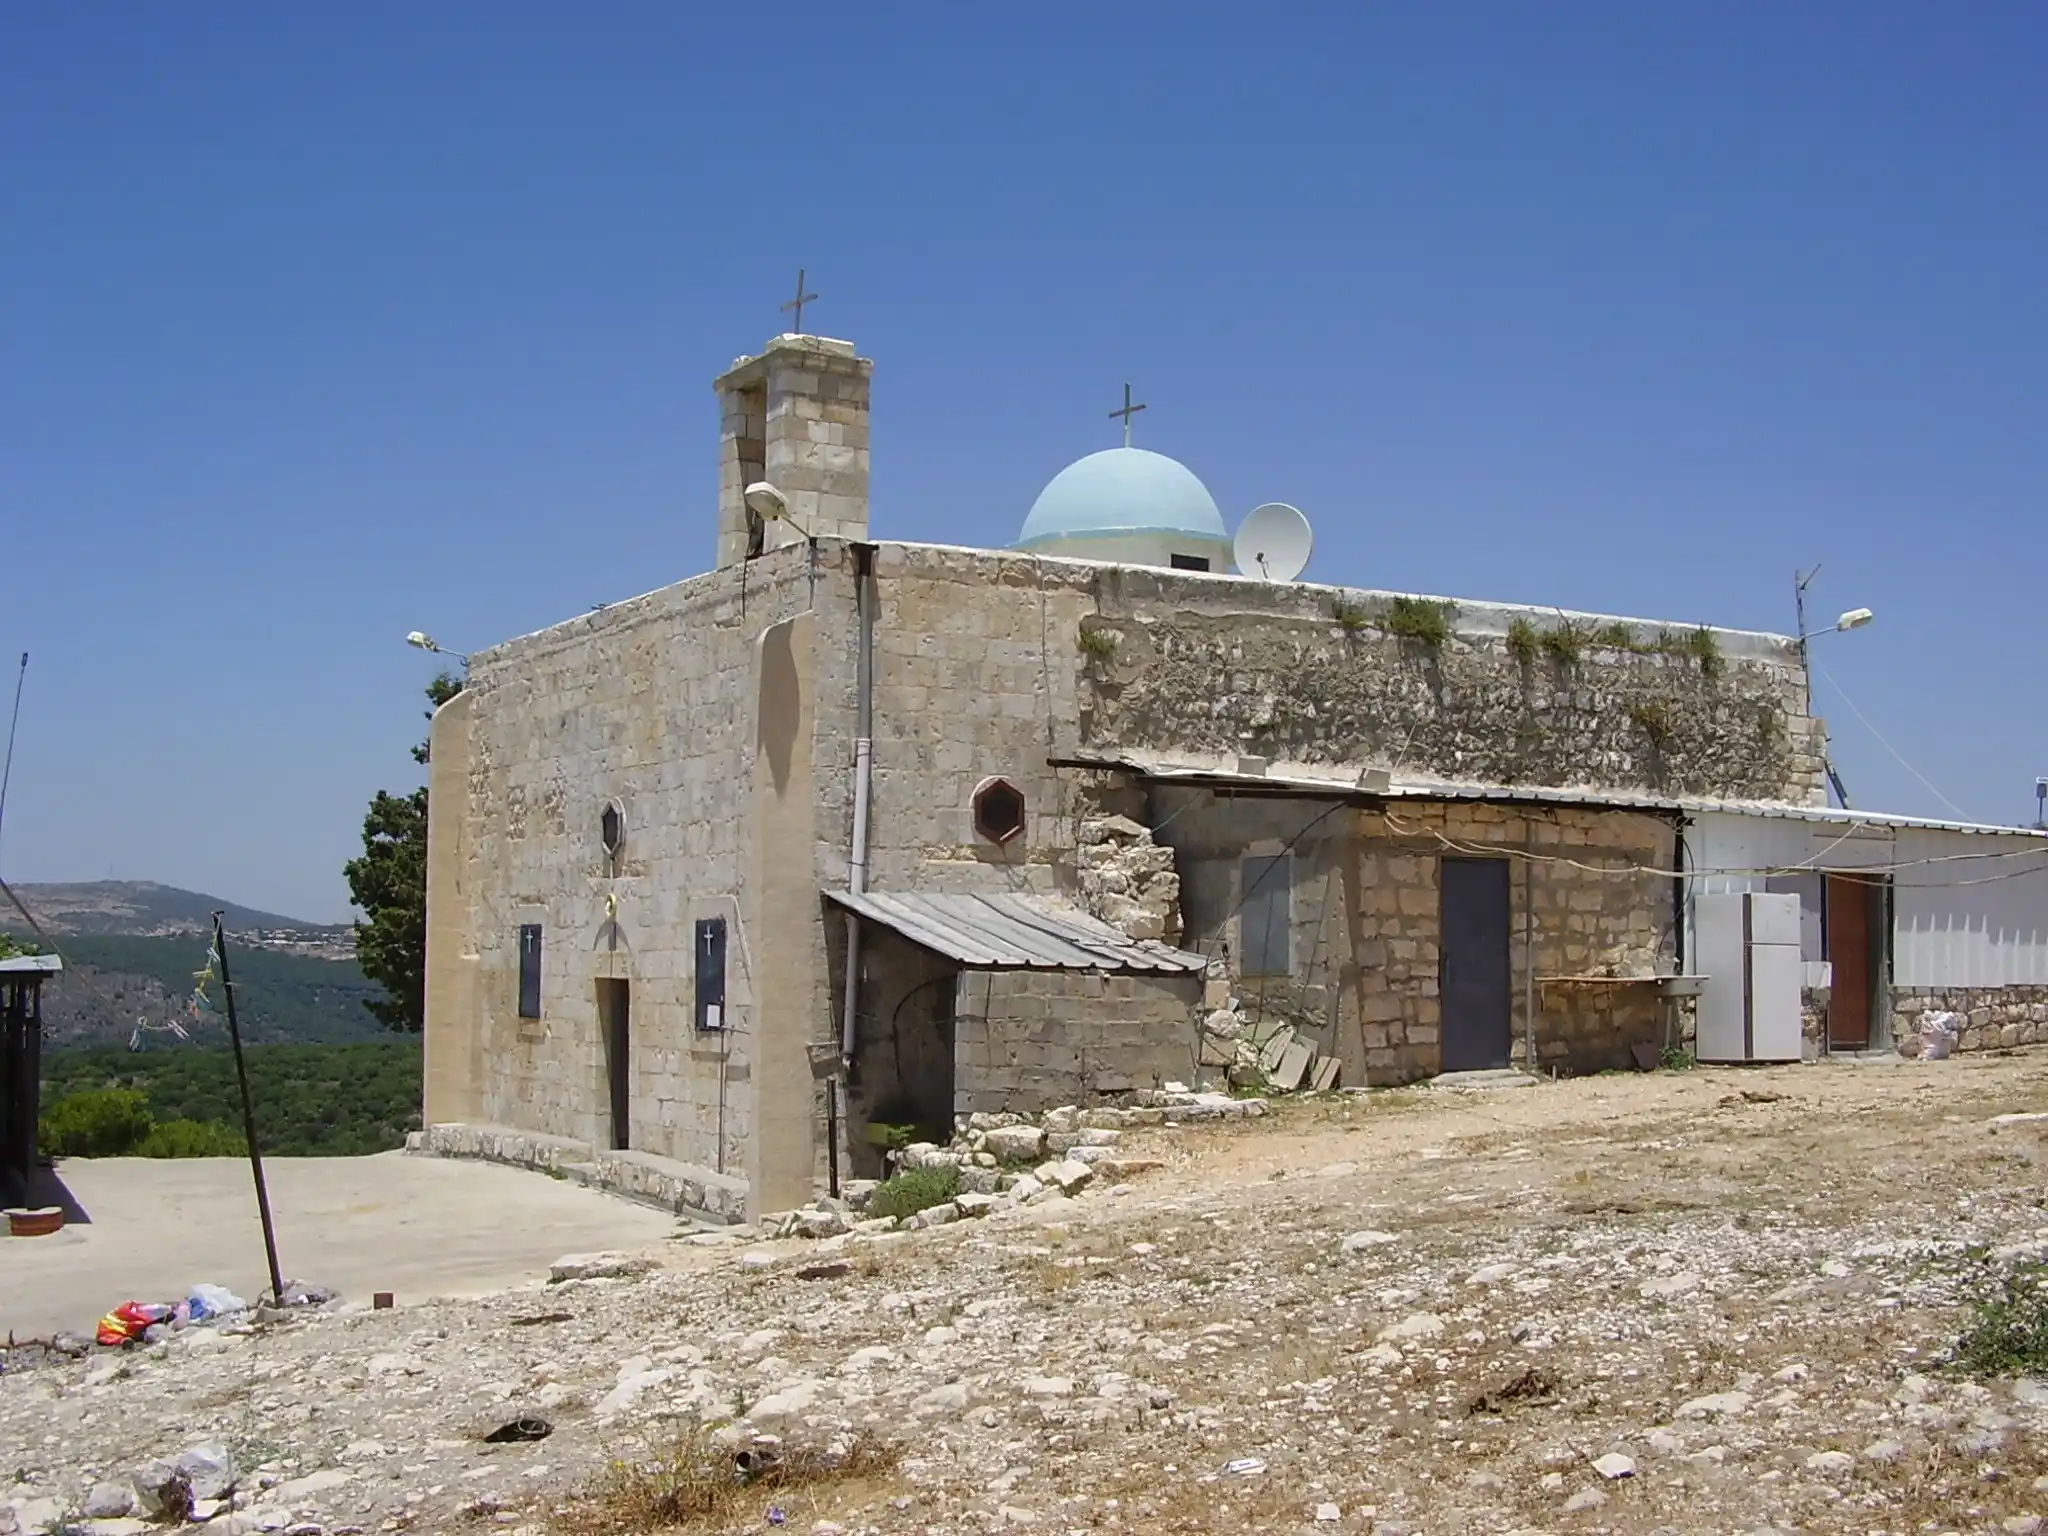 Hezbollah Strikes Greek Orthodox Church in Northern Israel: Violent Clashes and IDF Response